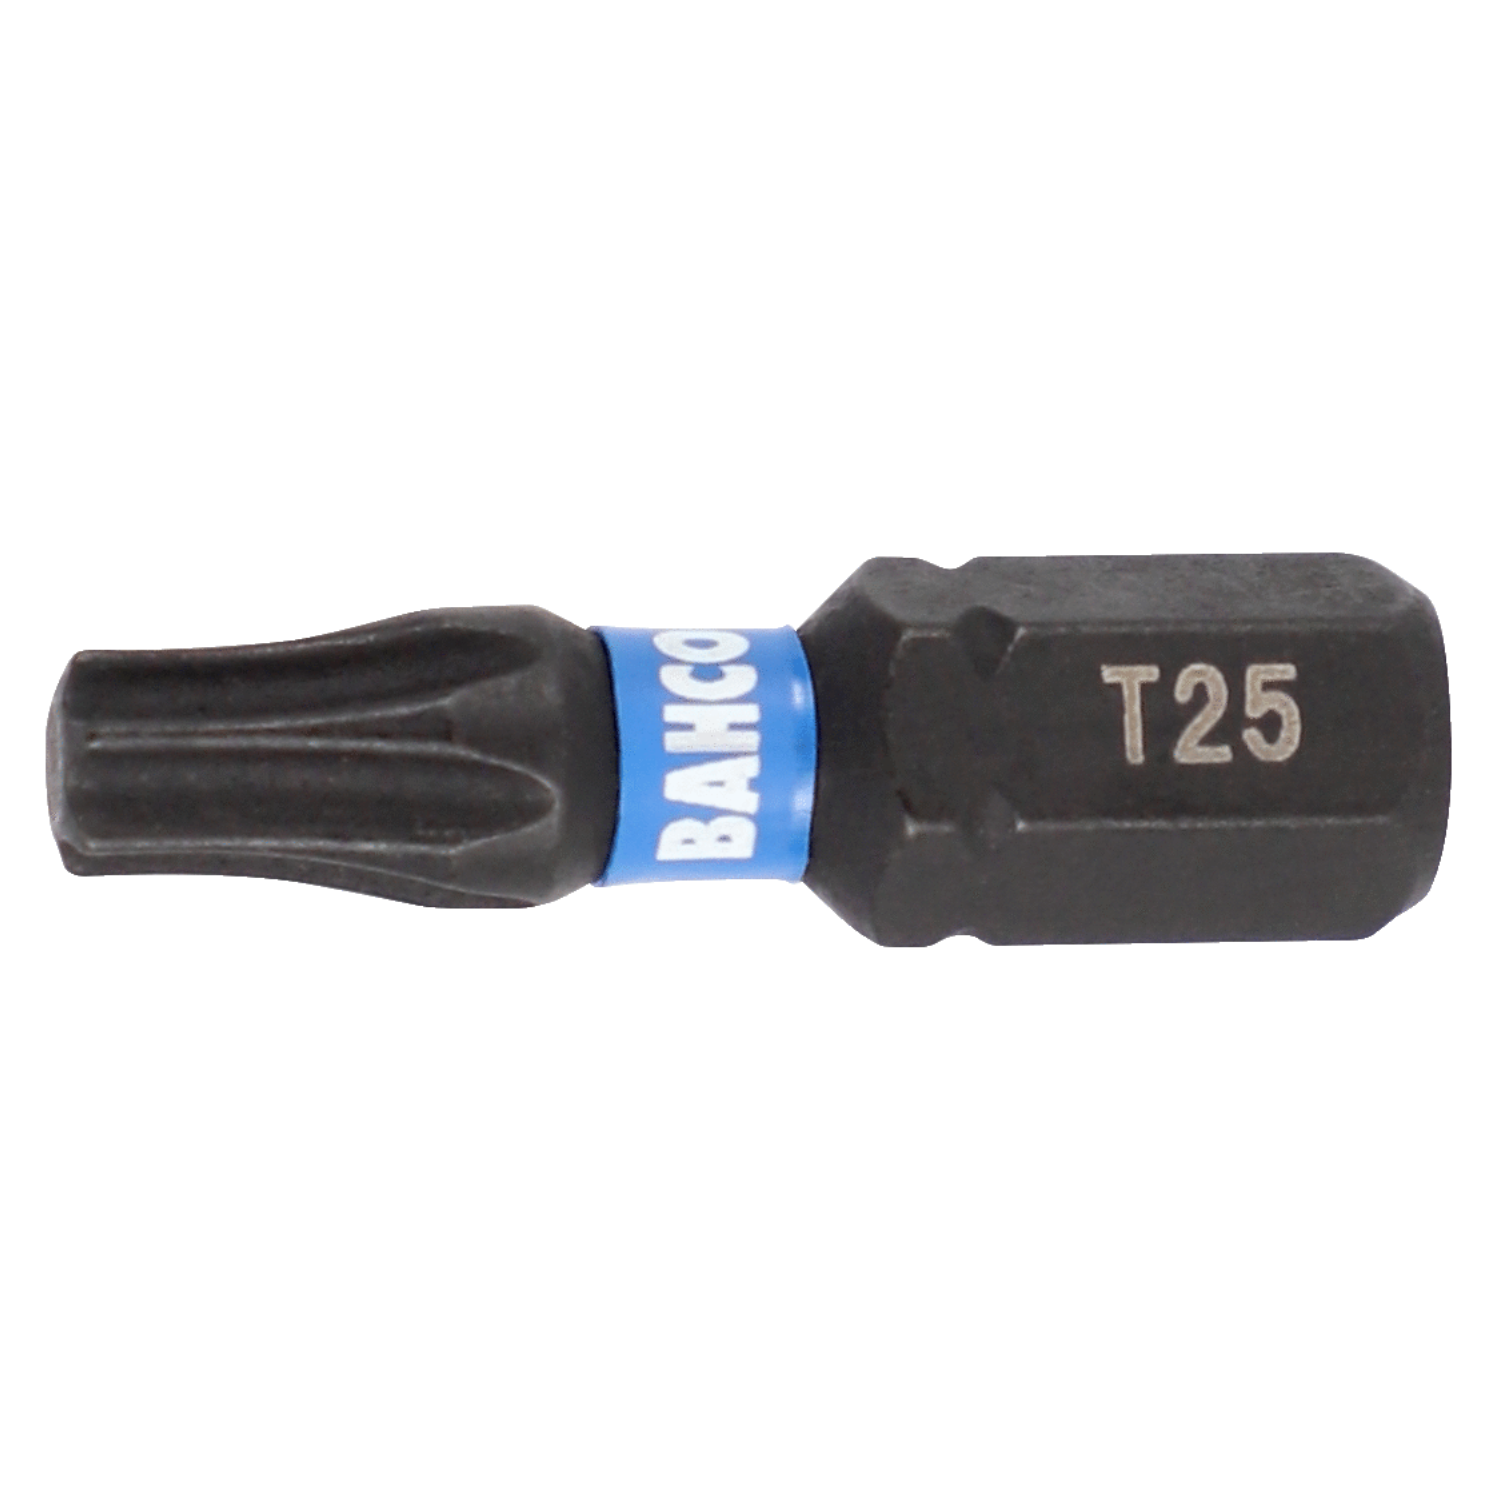 BAHCO 66IM/T 1/4" Heavy-Duty Torsion Screwdriver Bit - Premium Screwdriver Bit from BAHCO - Shop now at Yew Aik.